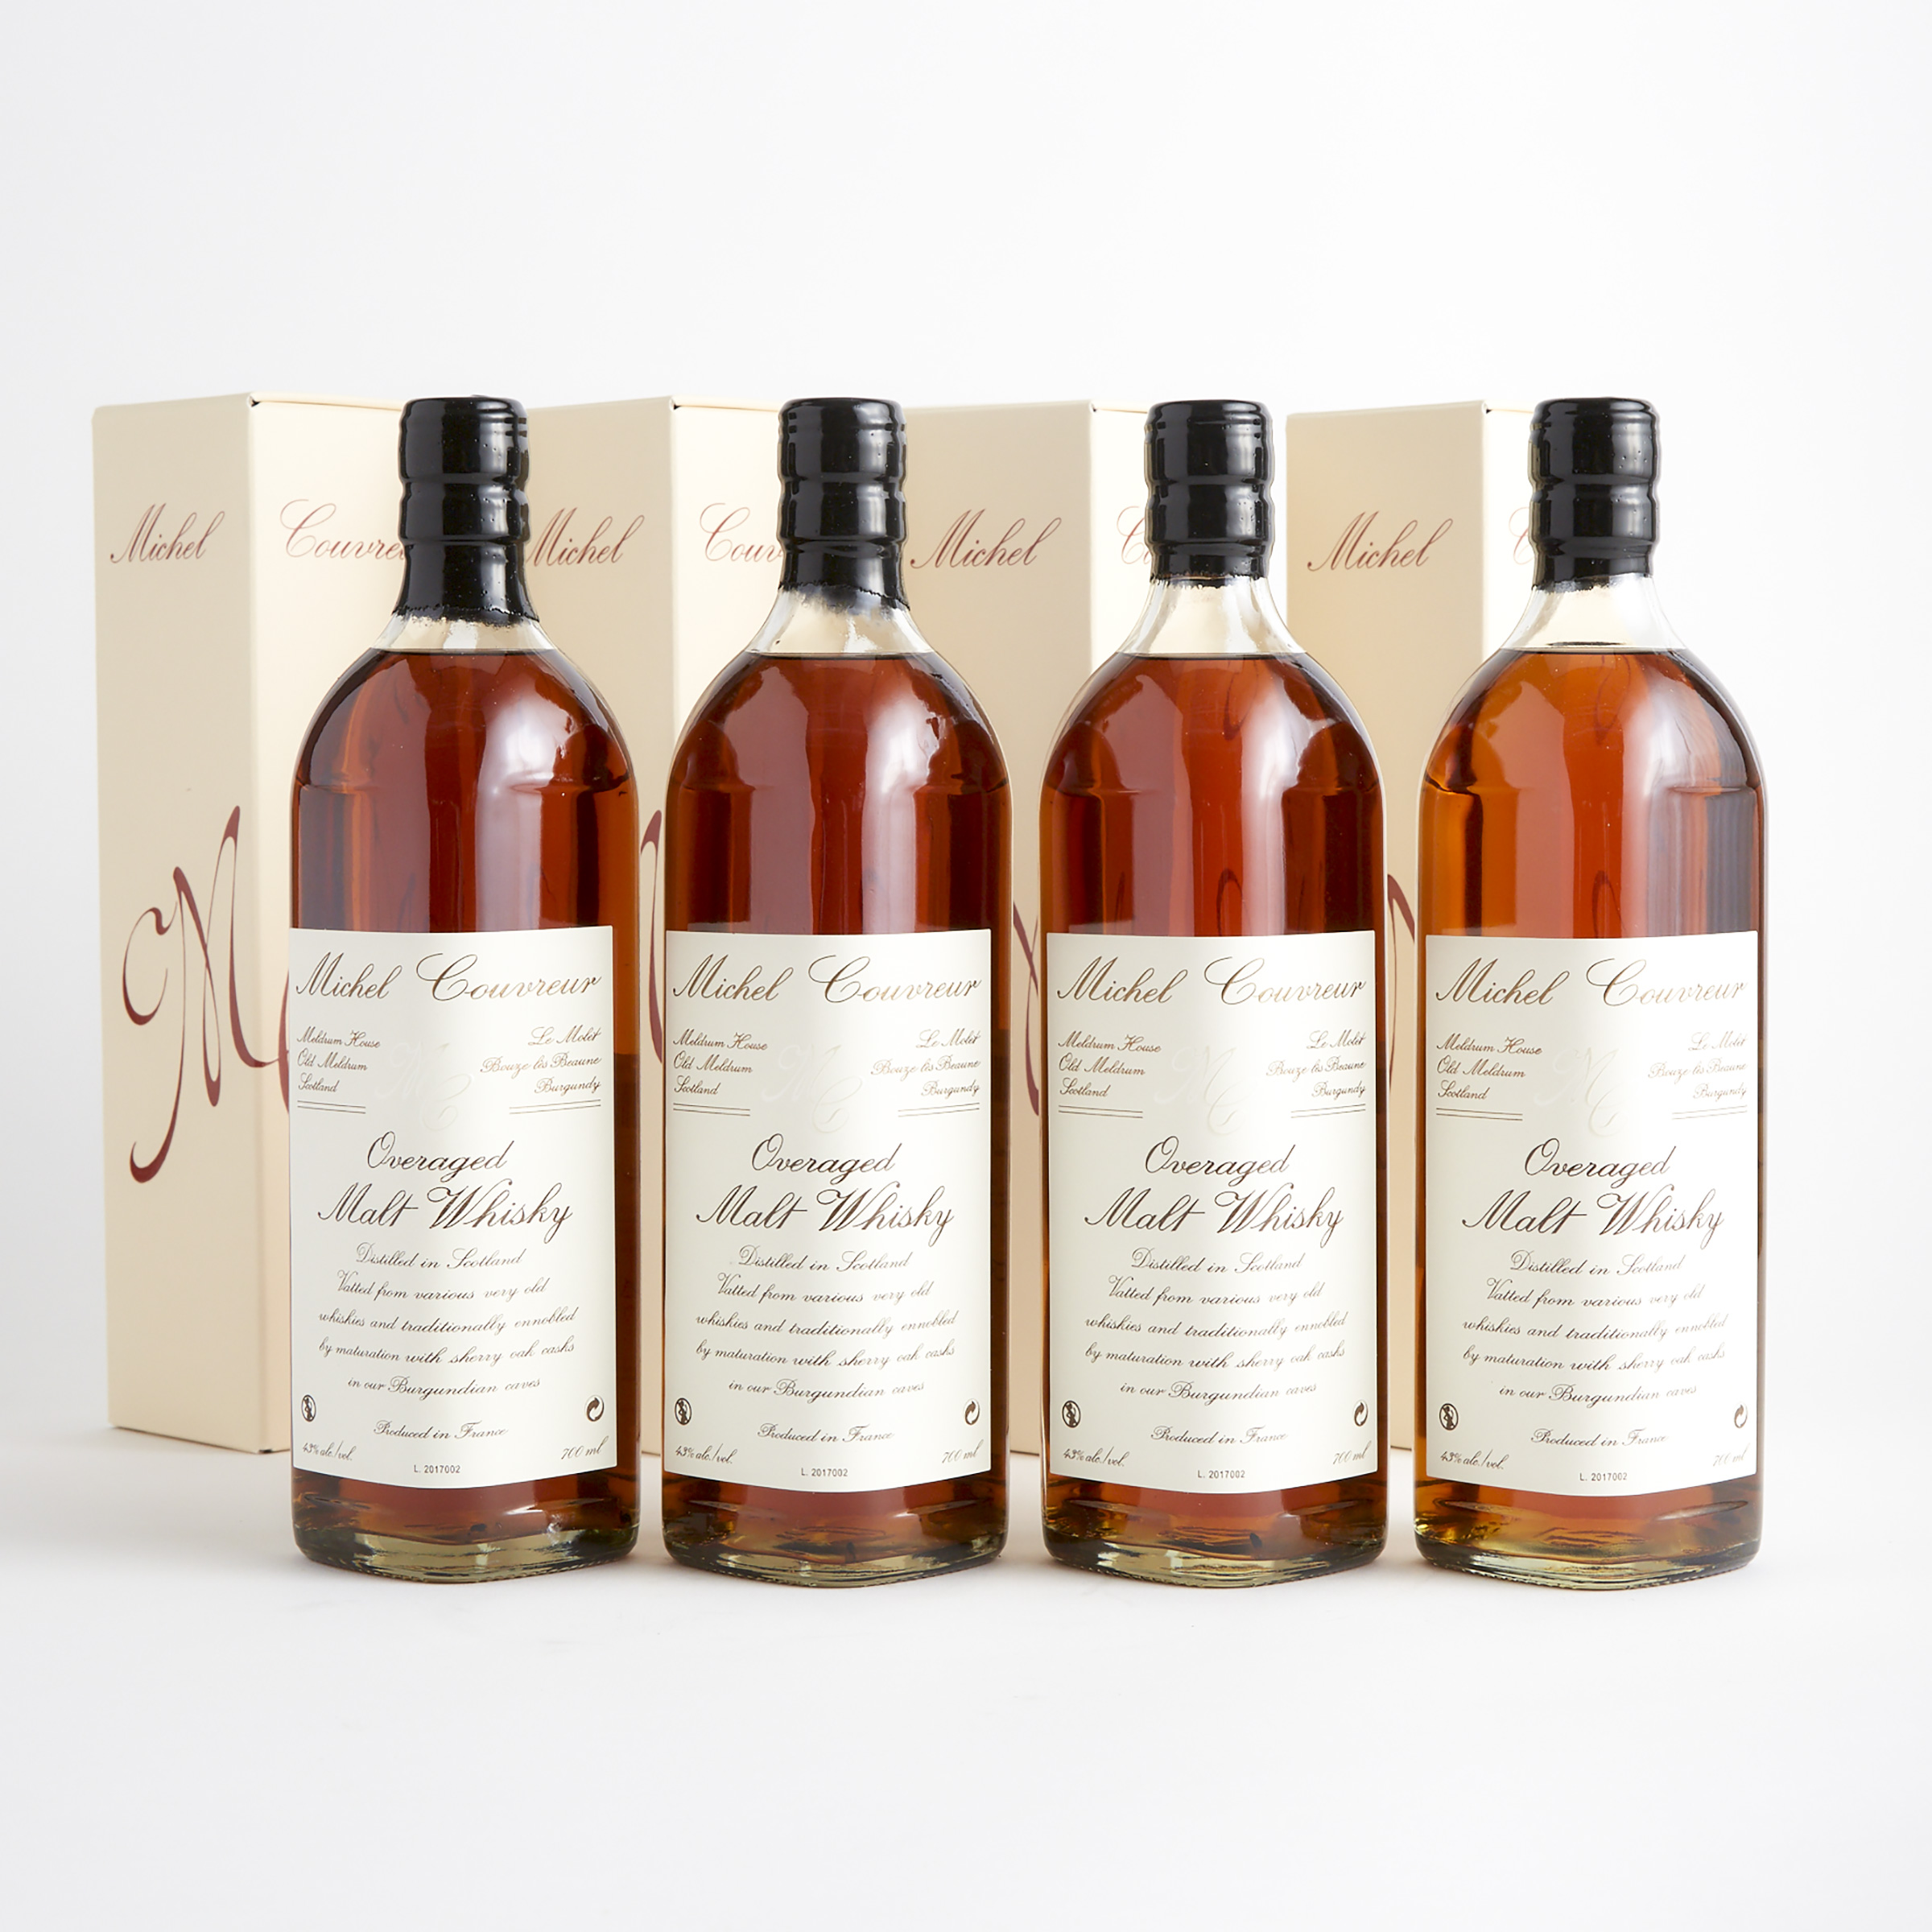 MICHEL COUVREUR OVERAGED MALT WHISKY (FOUR 700 ML)